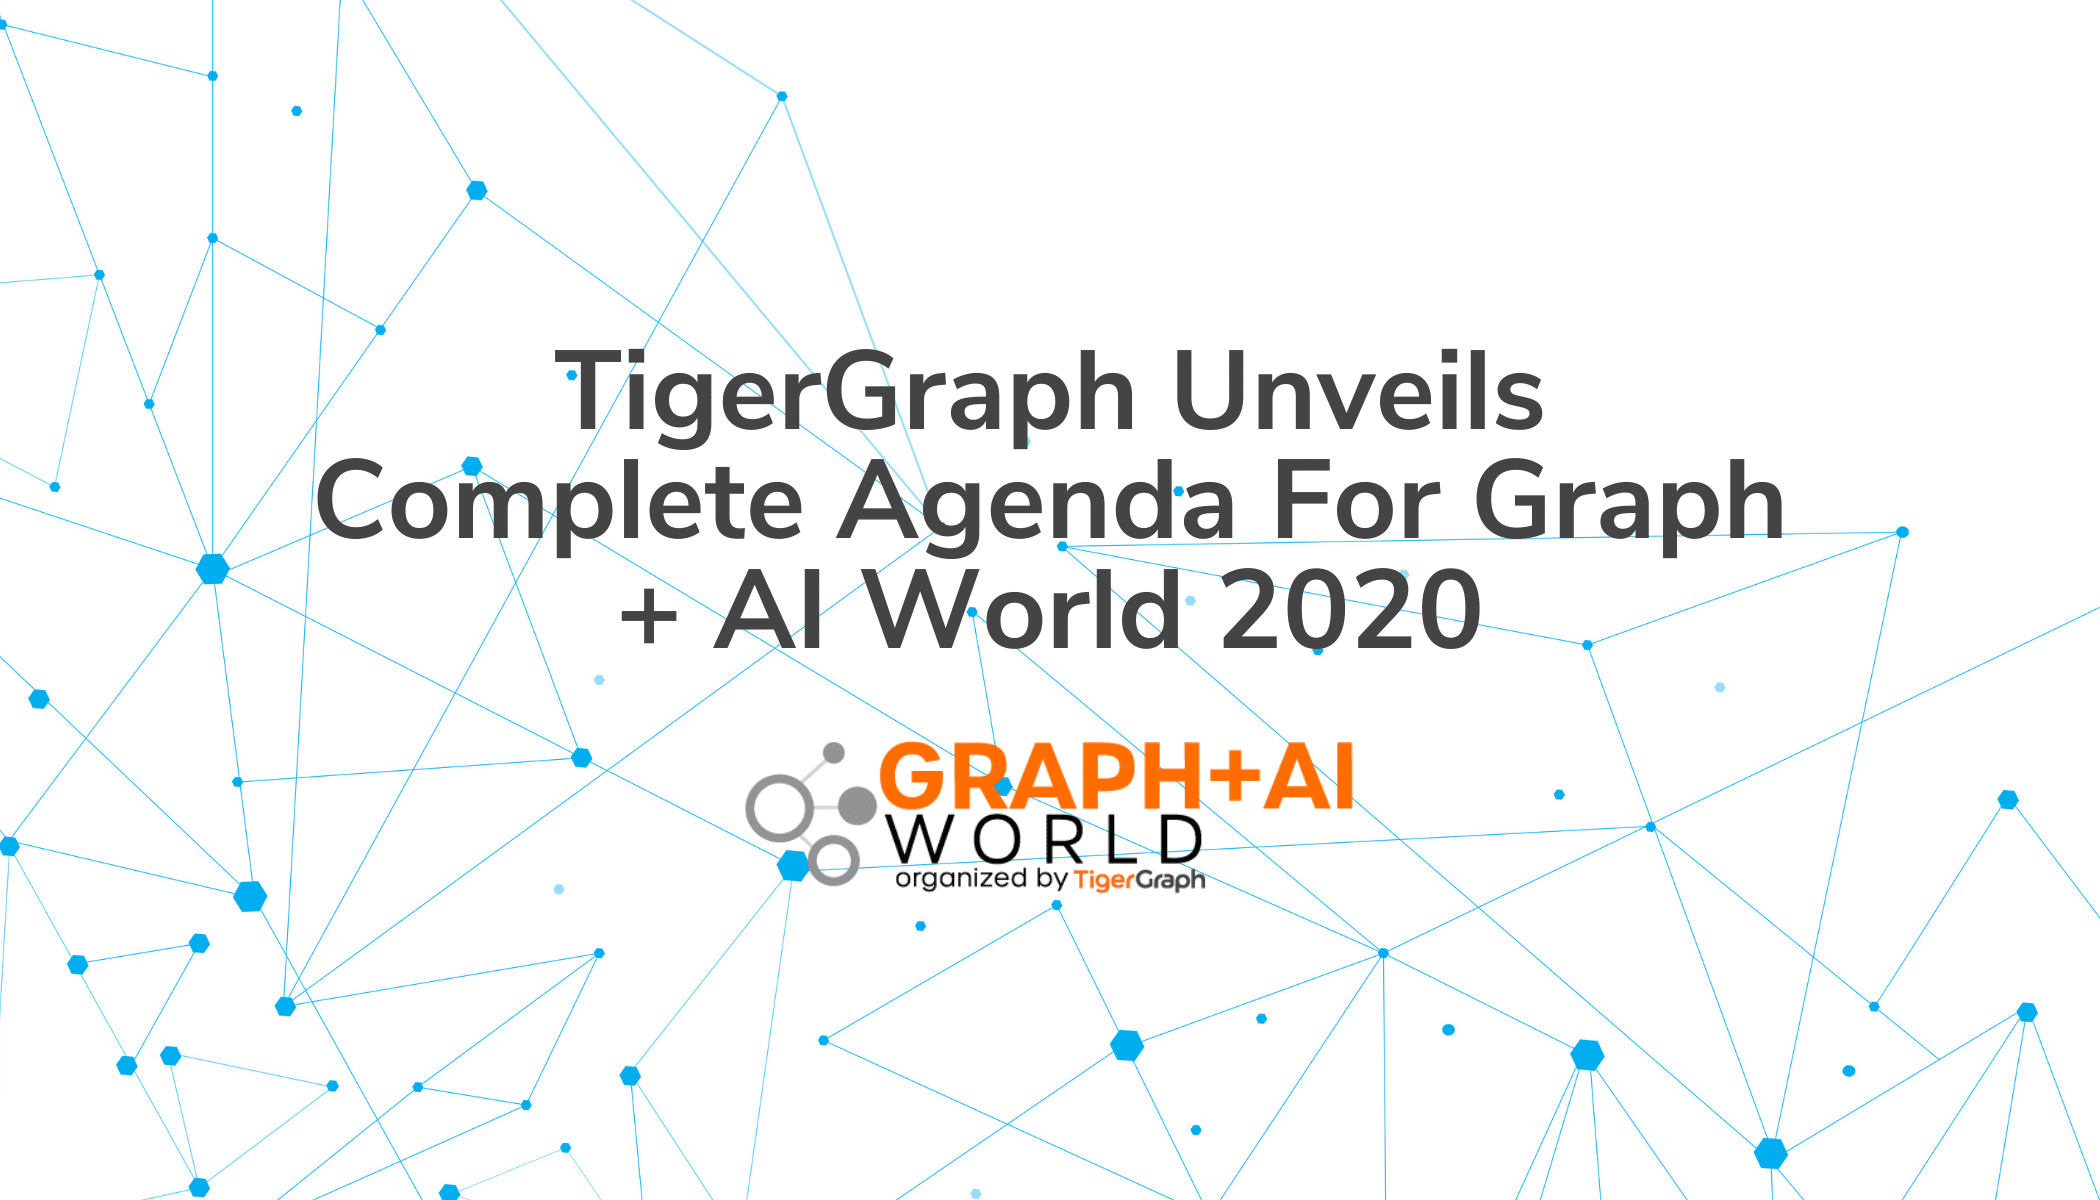 TigerGraph Unveils Complete Agenda For Graph + AI World 2020, First Open Conference On Accelerating AI With Graph